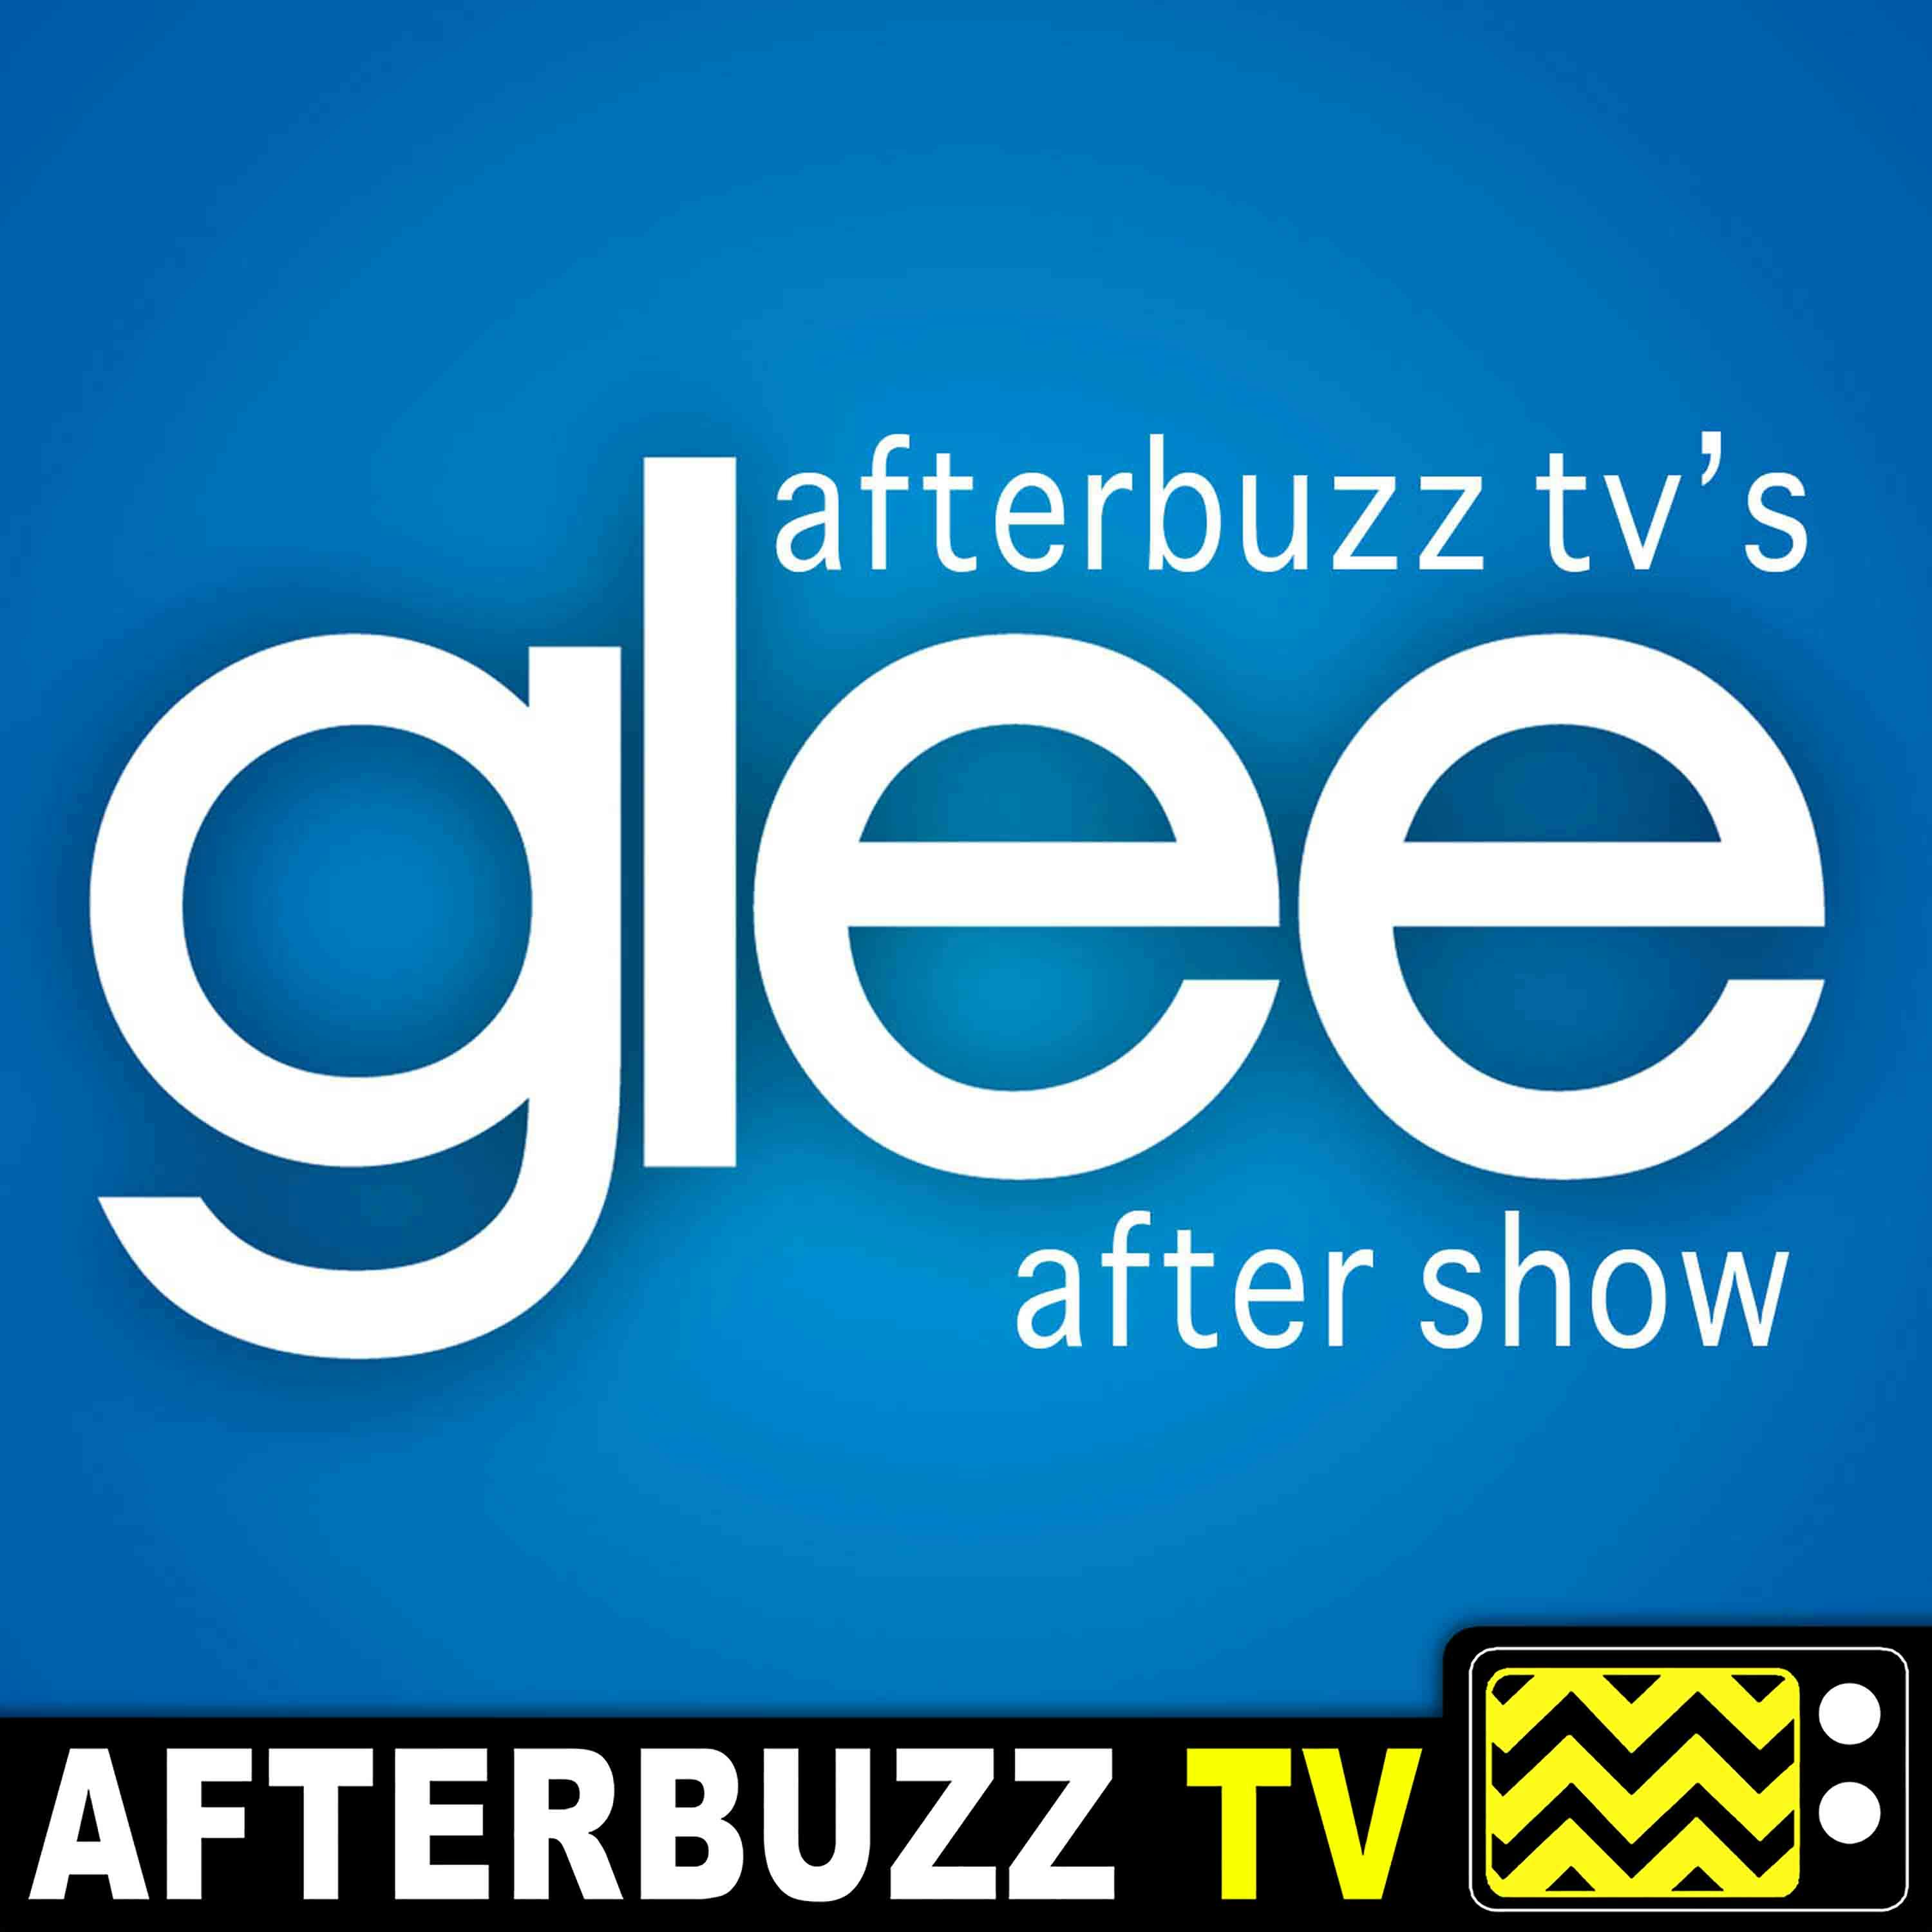 Glee S:6 | Transitioning E:7 | AfterBuzz TV AfterShow